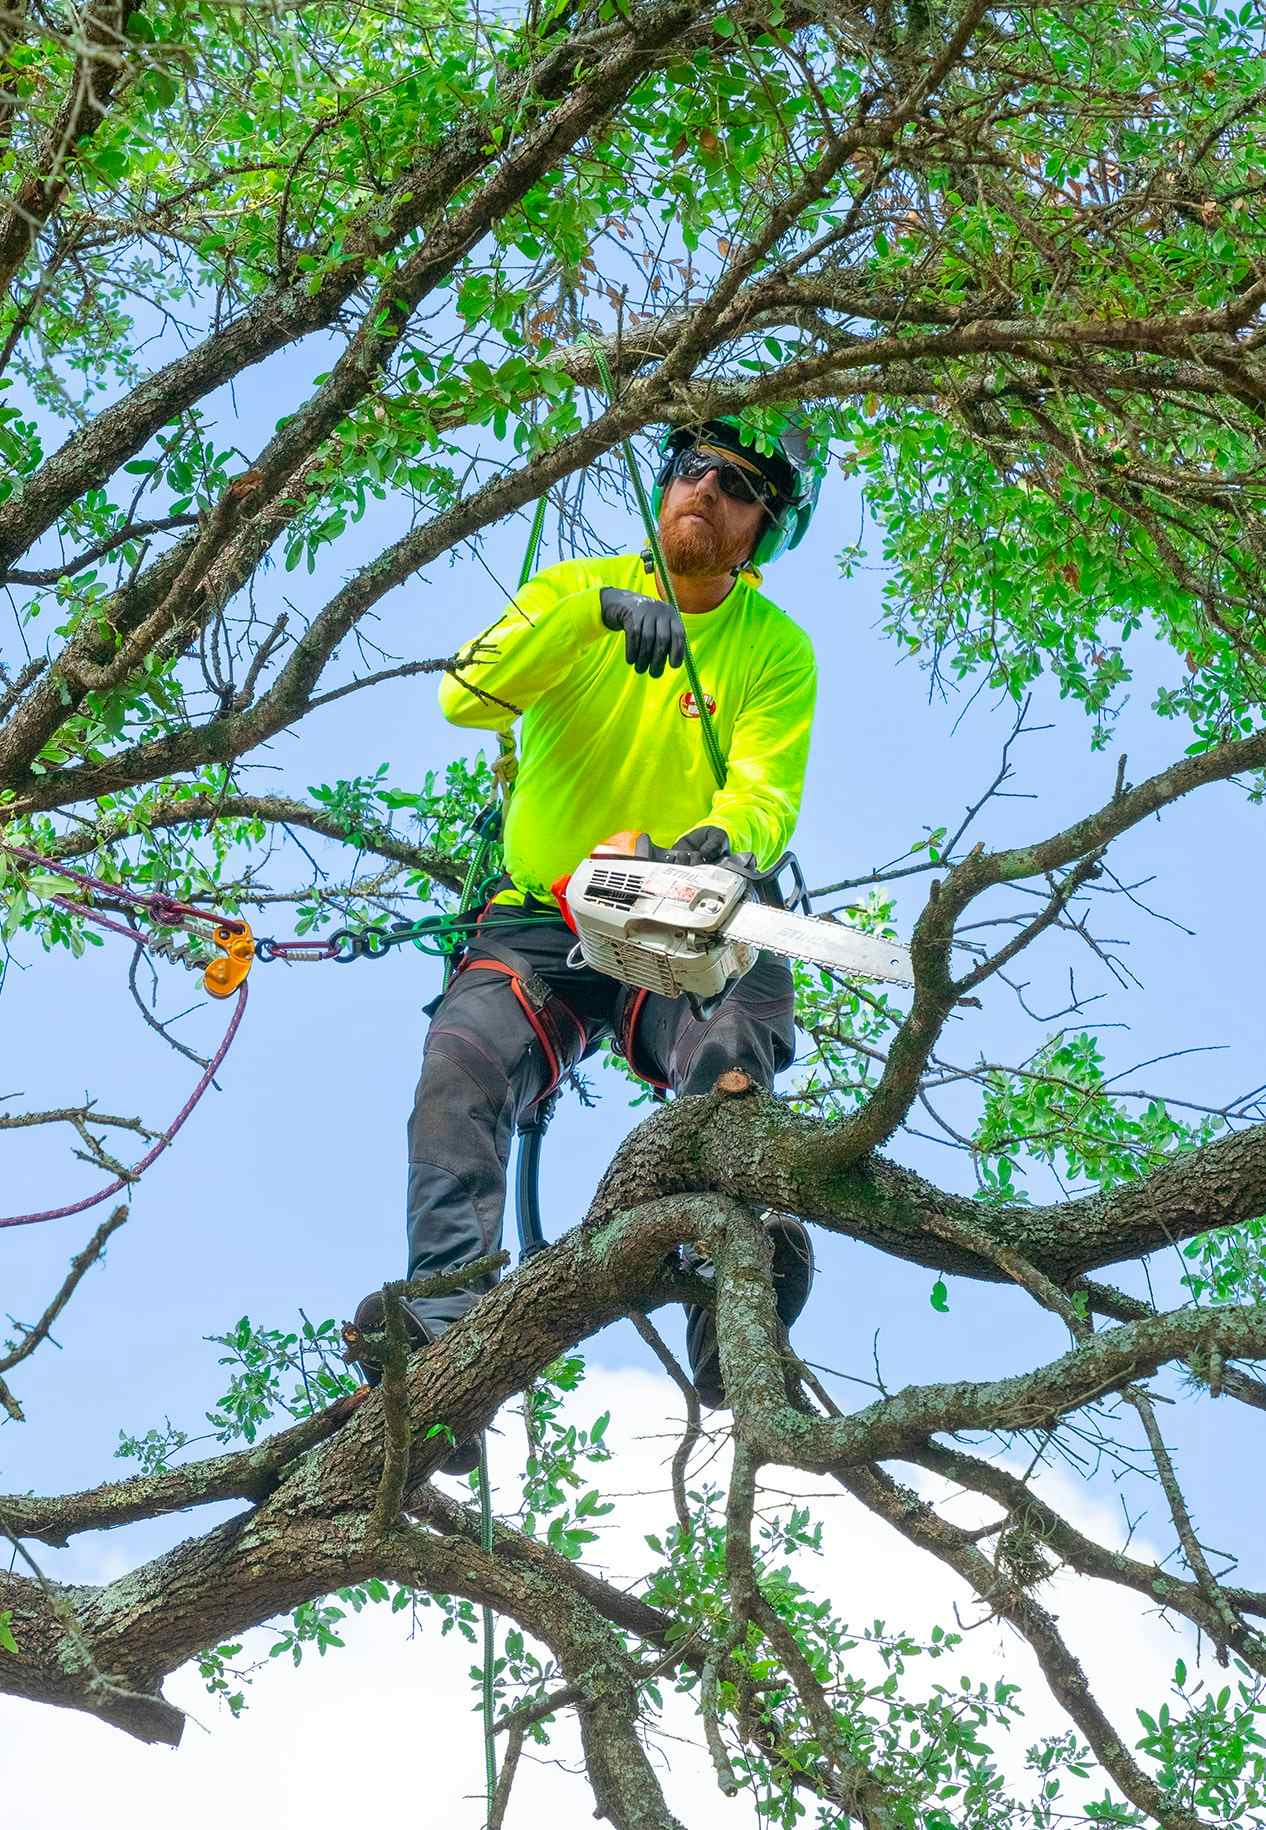 Arborist in tree with chainsaw preparing to prune large branches.